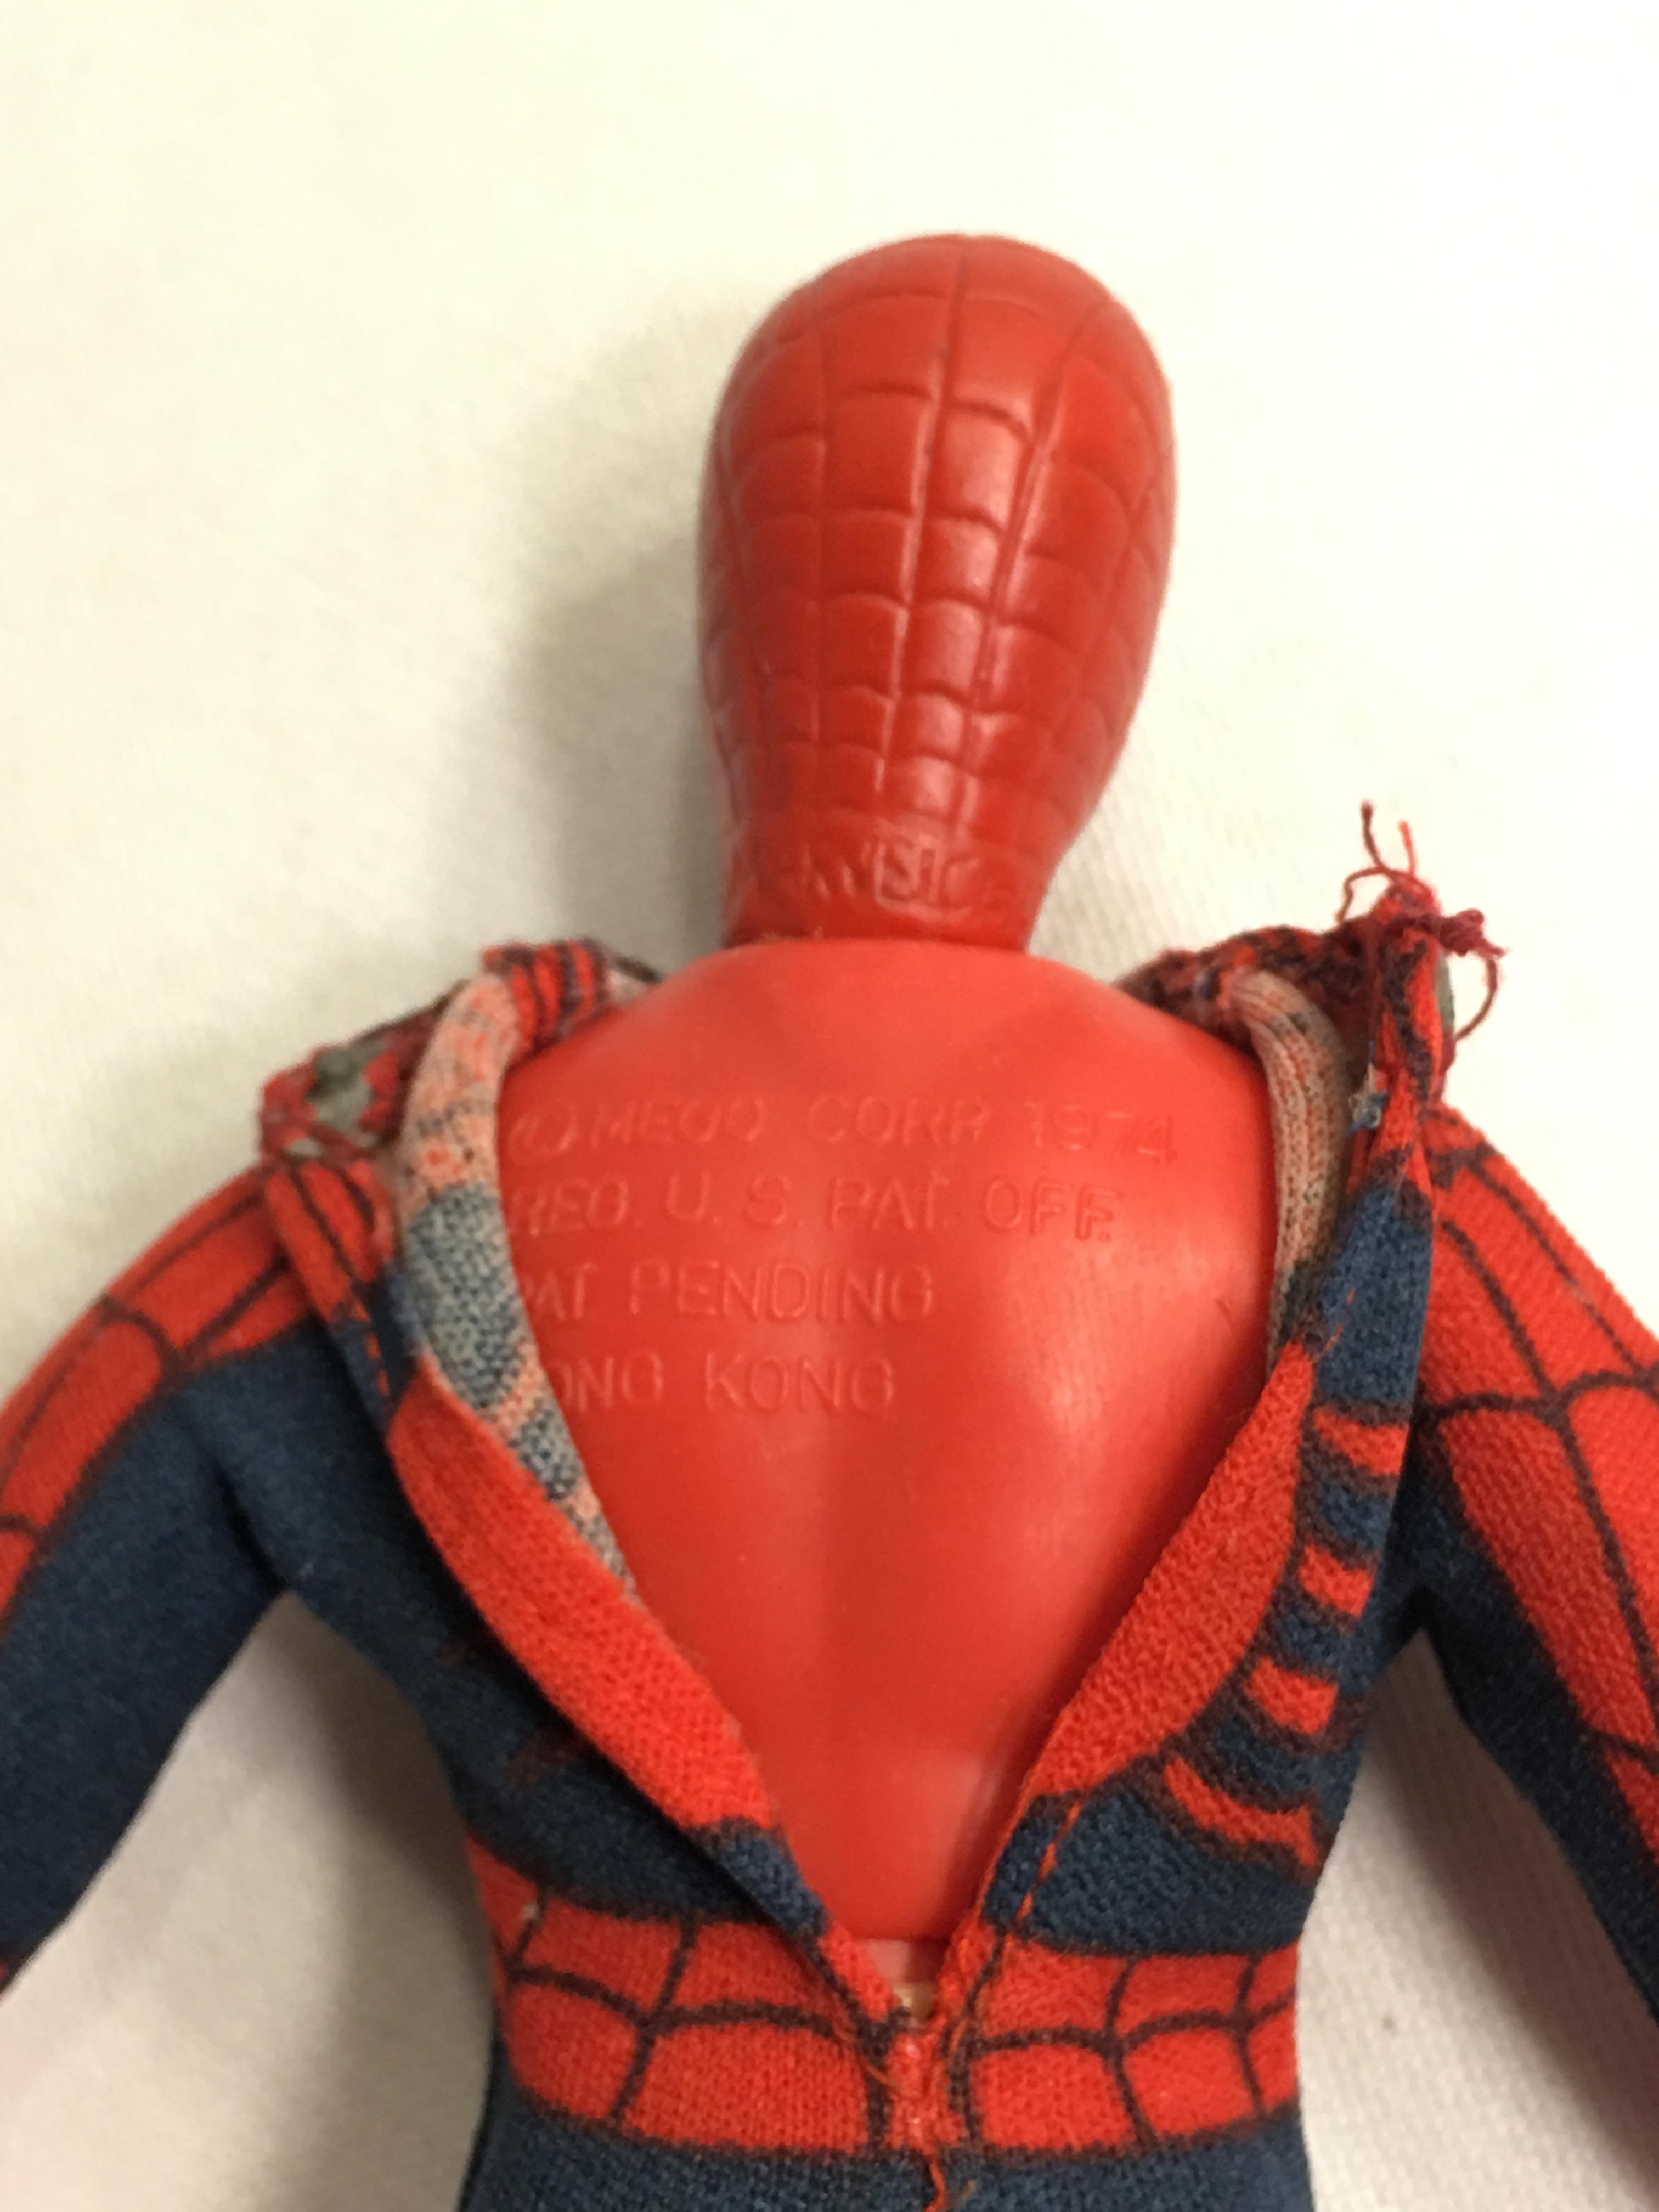 Collector Loose Vintage 1974 Mego The Spider-man Action Figure 8.5"tall